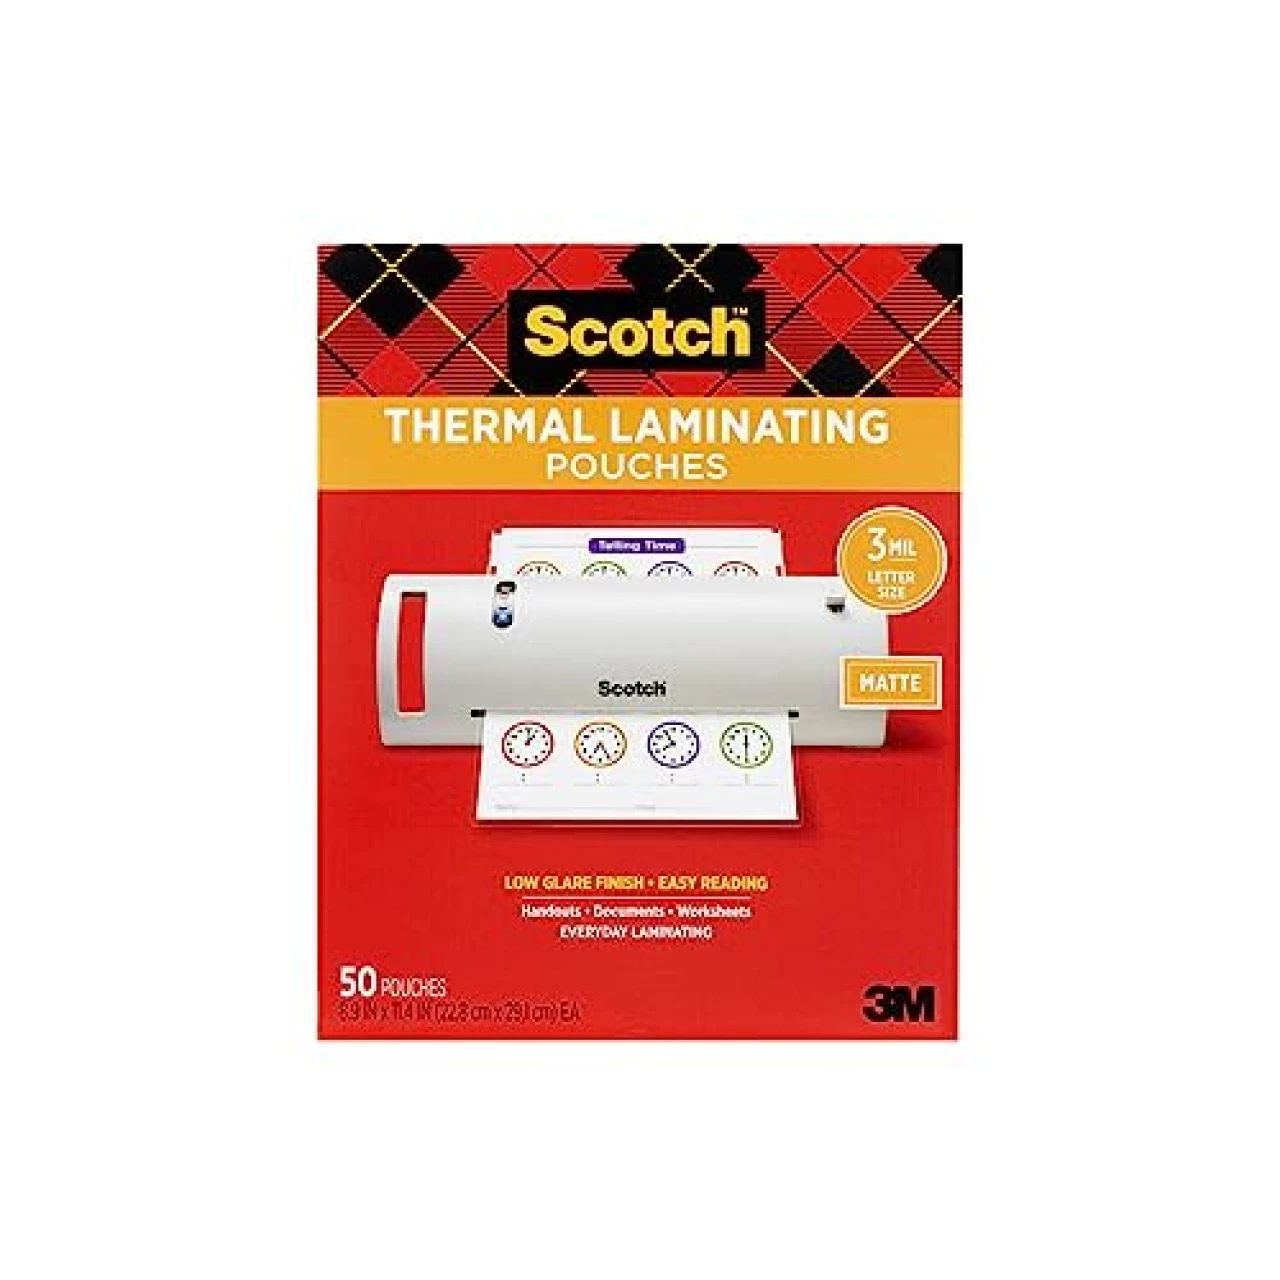 Scotch Matte Thermal Laminating Pouches, Ultra Clear with Matte Finish, Letter Size 8.9 in x 11.4 in, 50-Pack